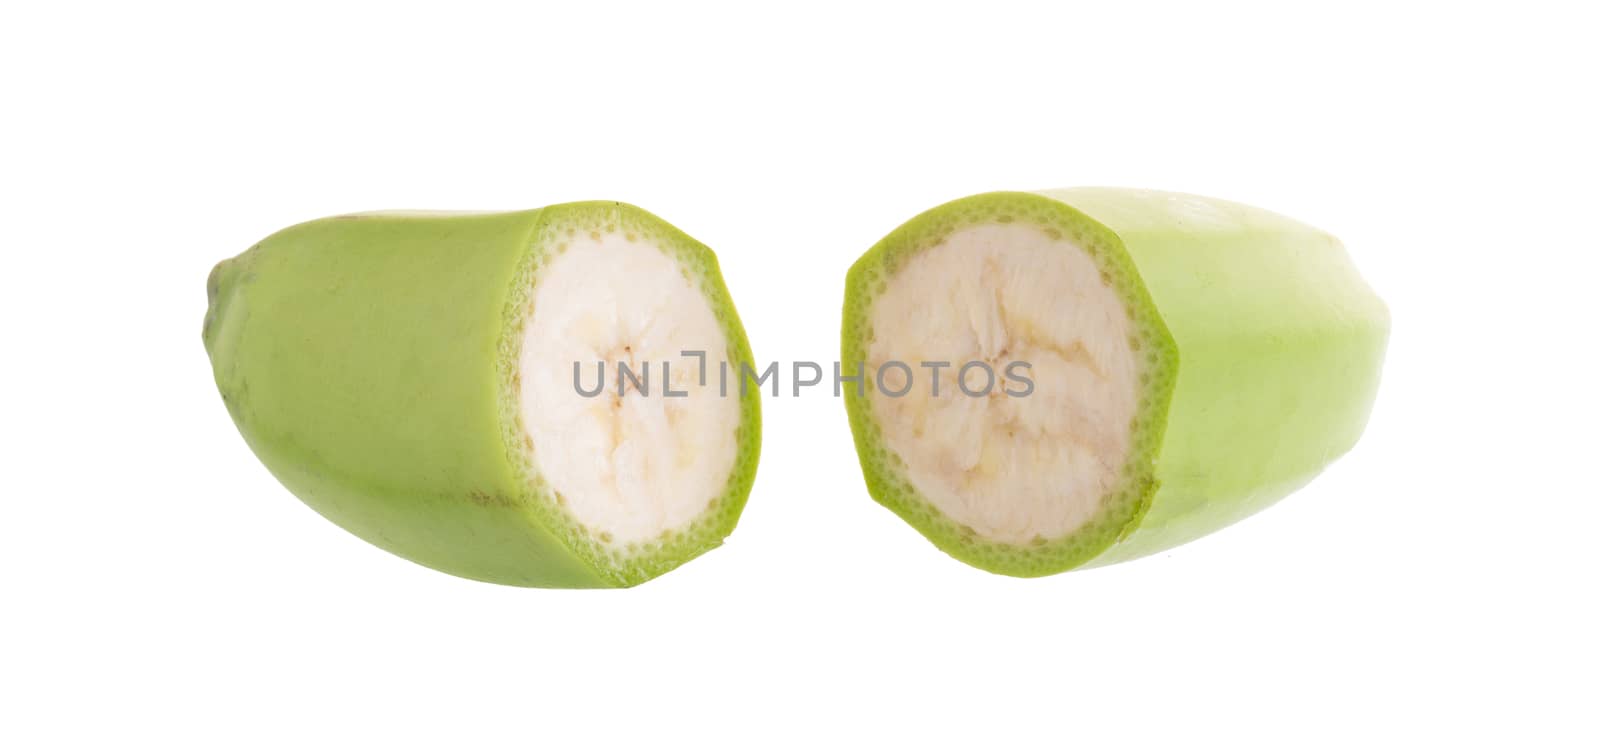 Cut of green bananas isolated on white background